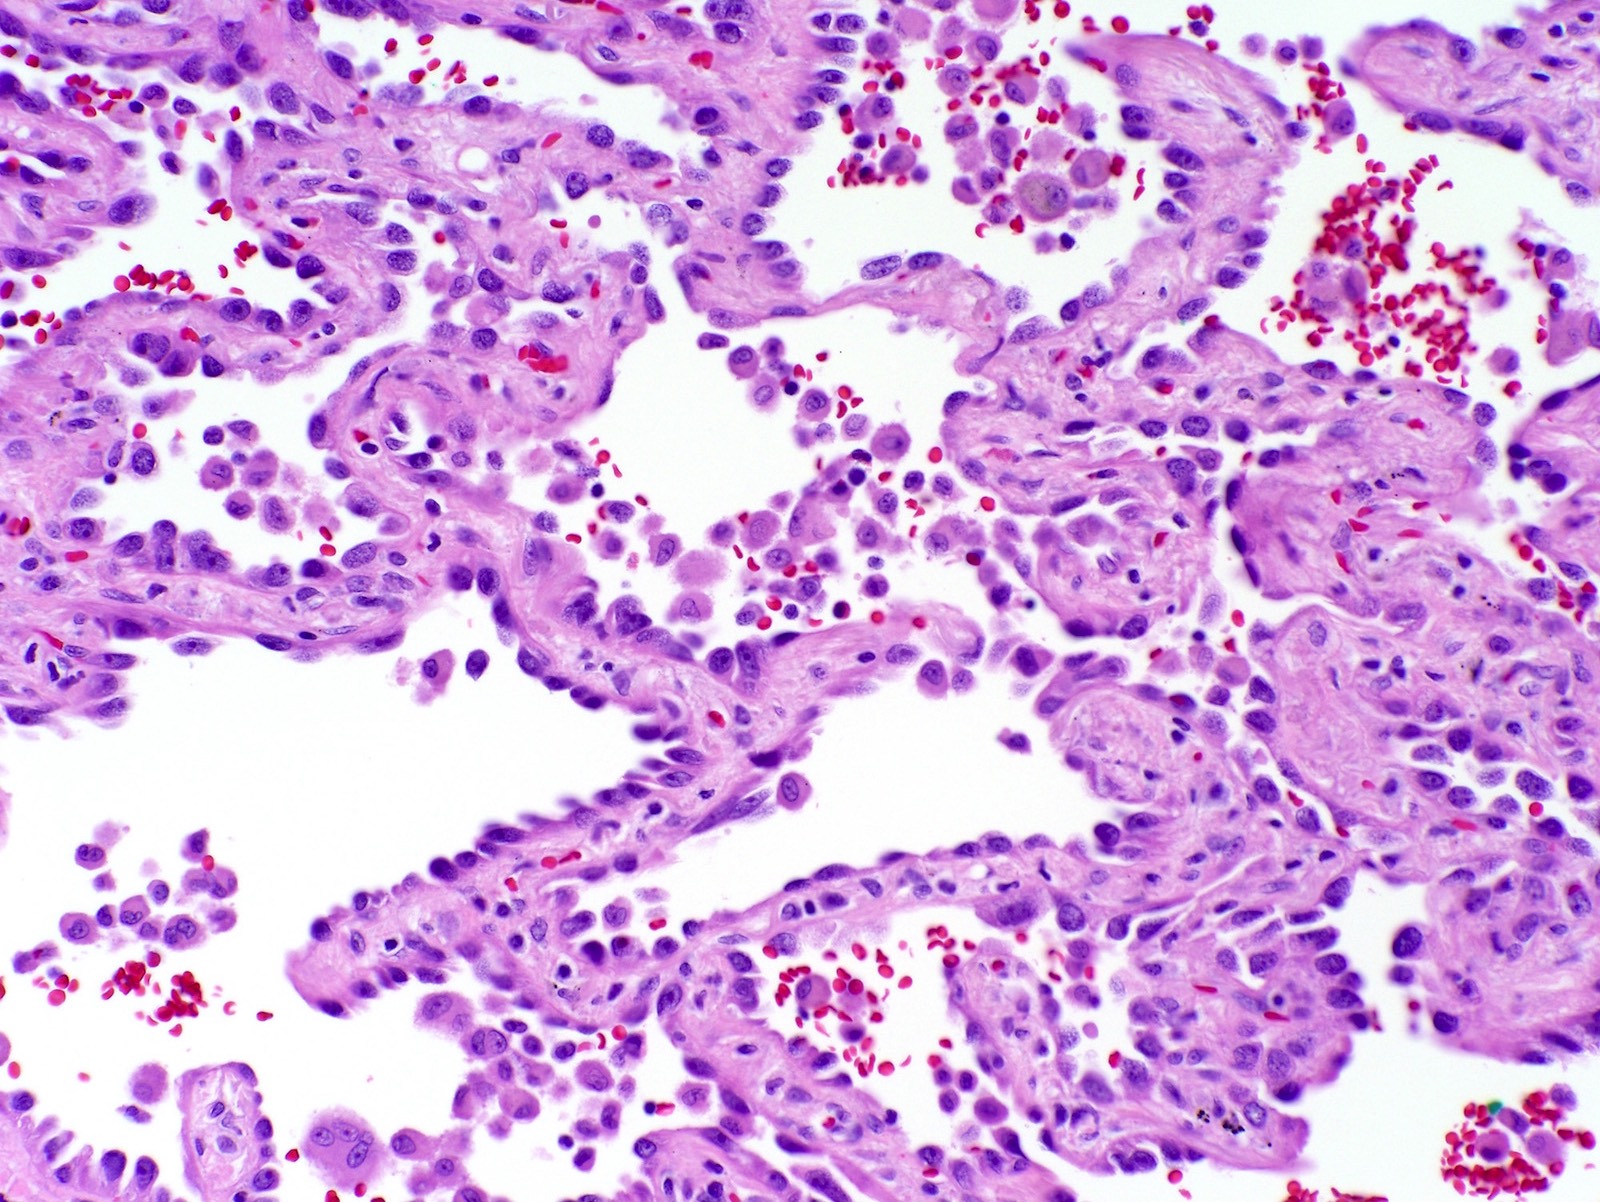 Lepidic pattern, cytologic features